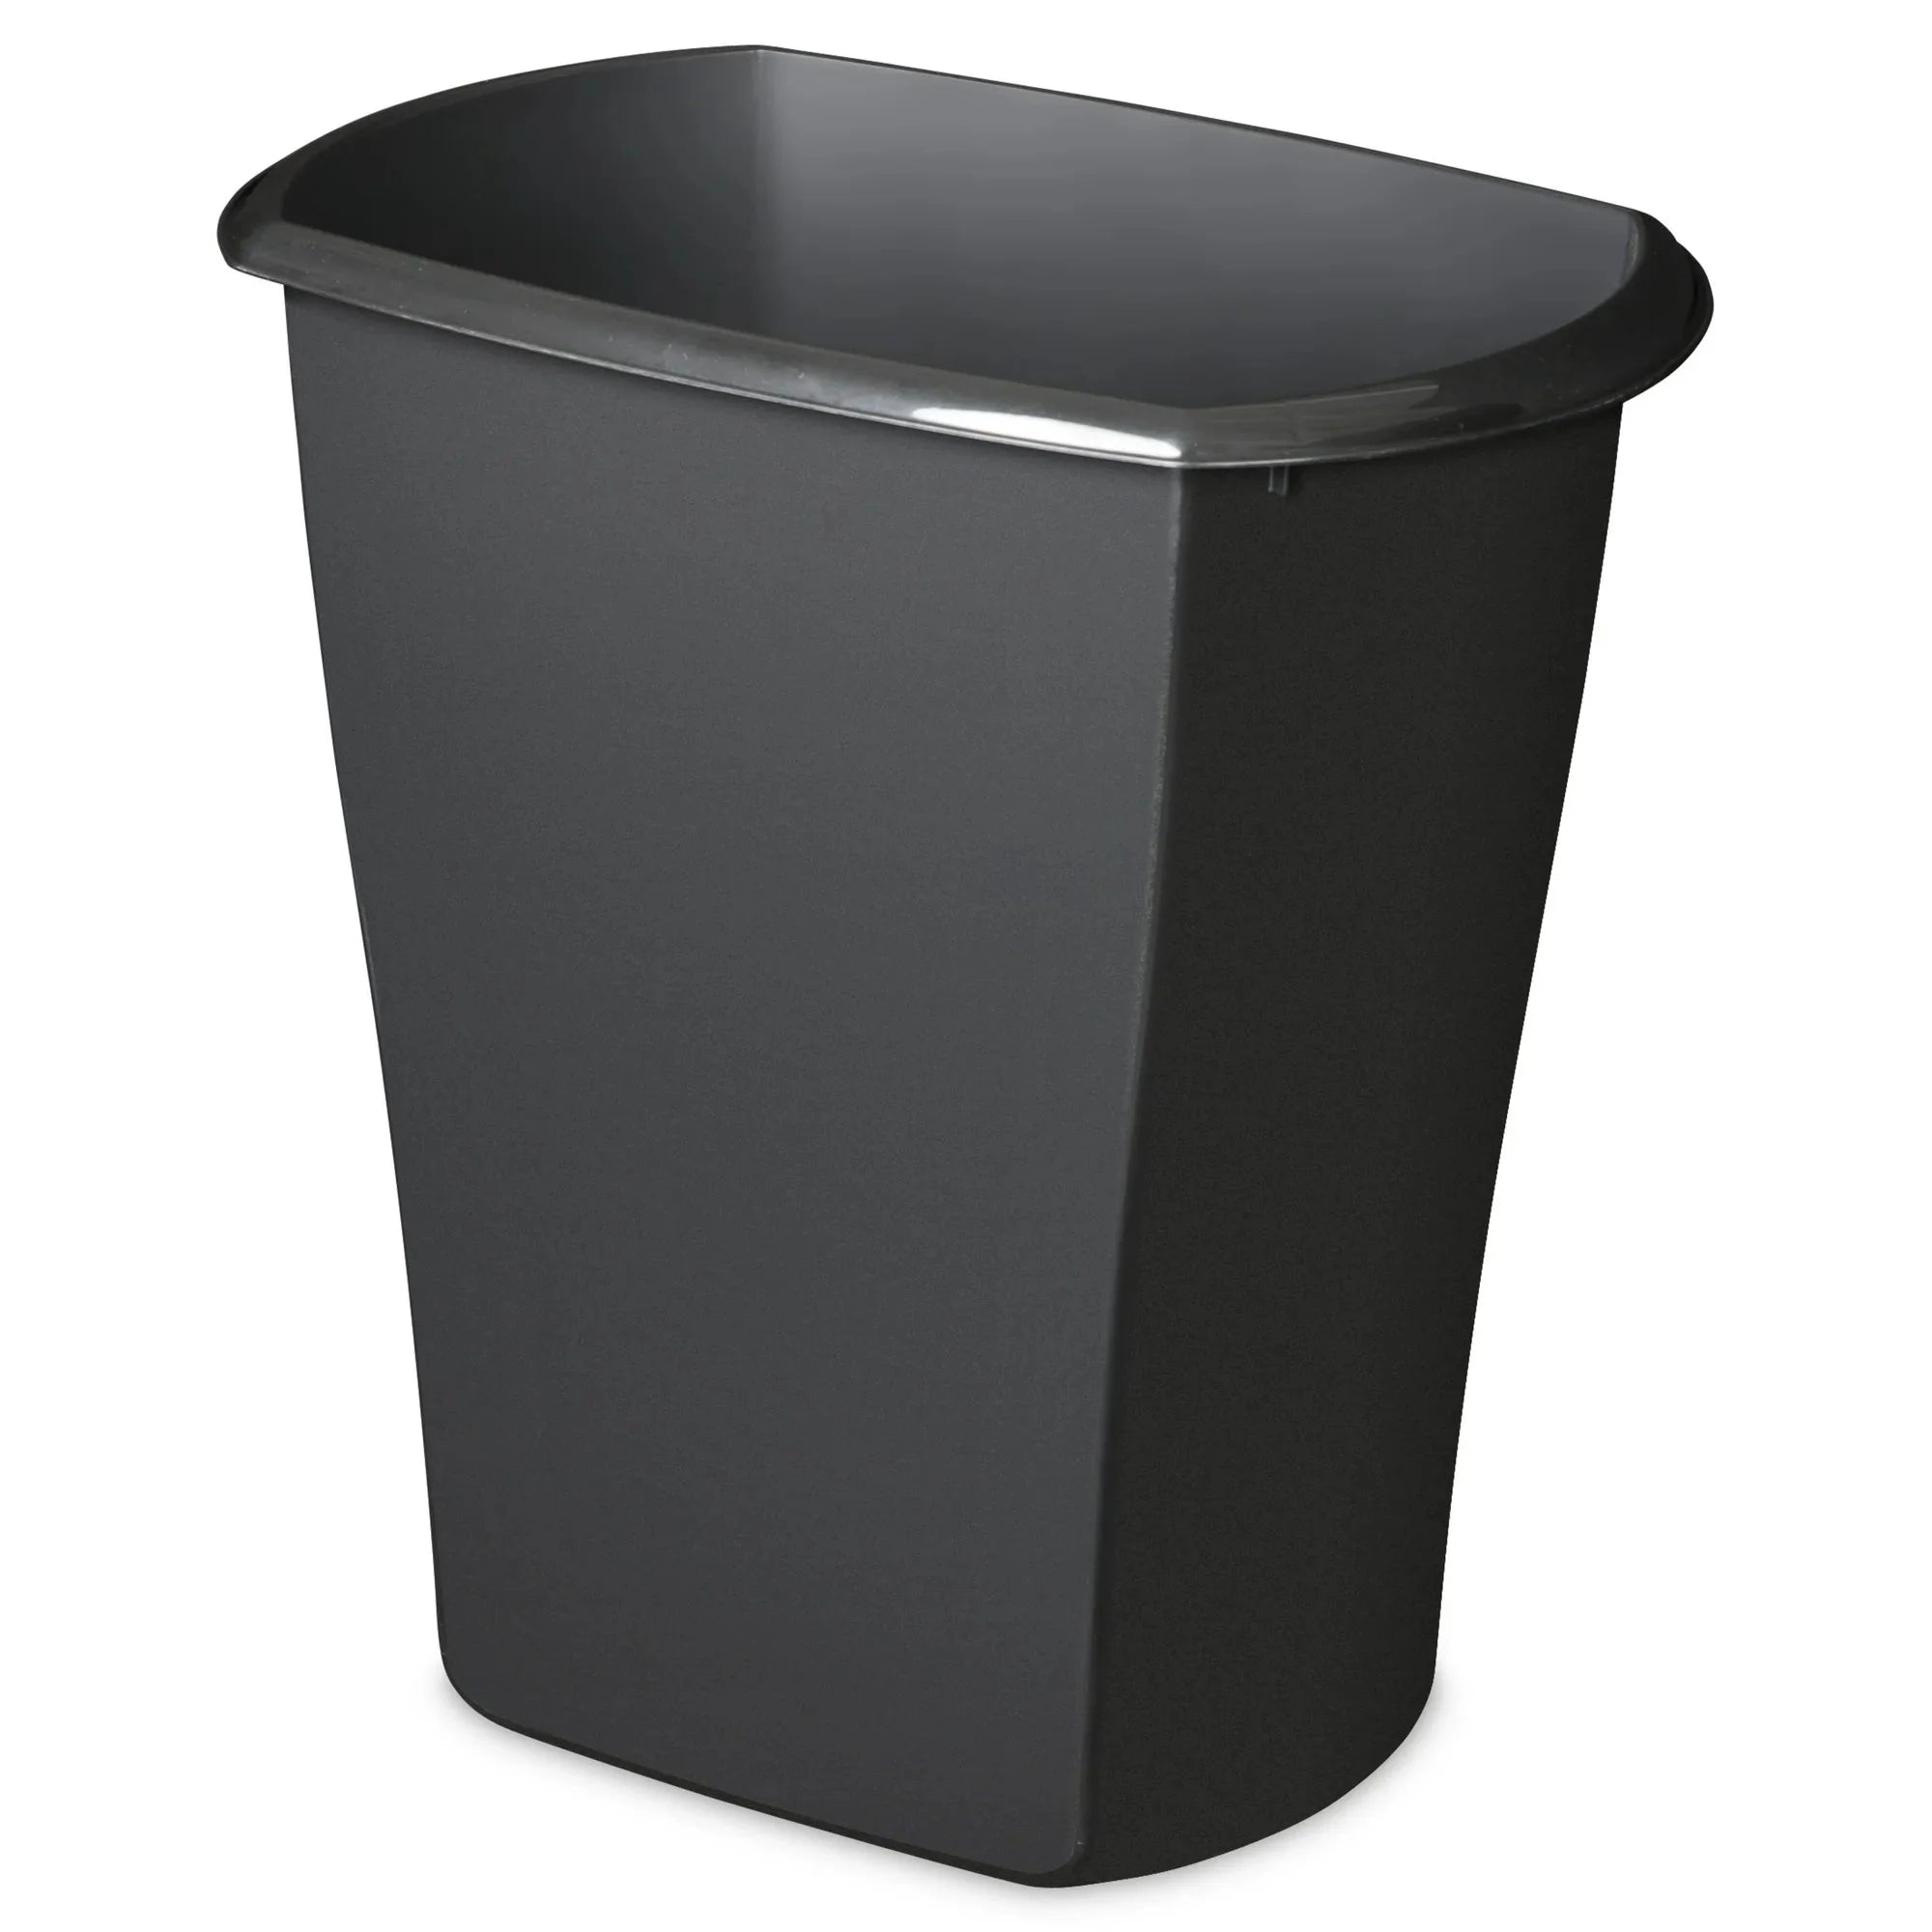 Wholesale prices with free shipping all over United States Sterilite 10 Gal. Rectangular Wastebasket Plastic, Black - Steven Deals